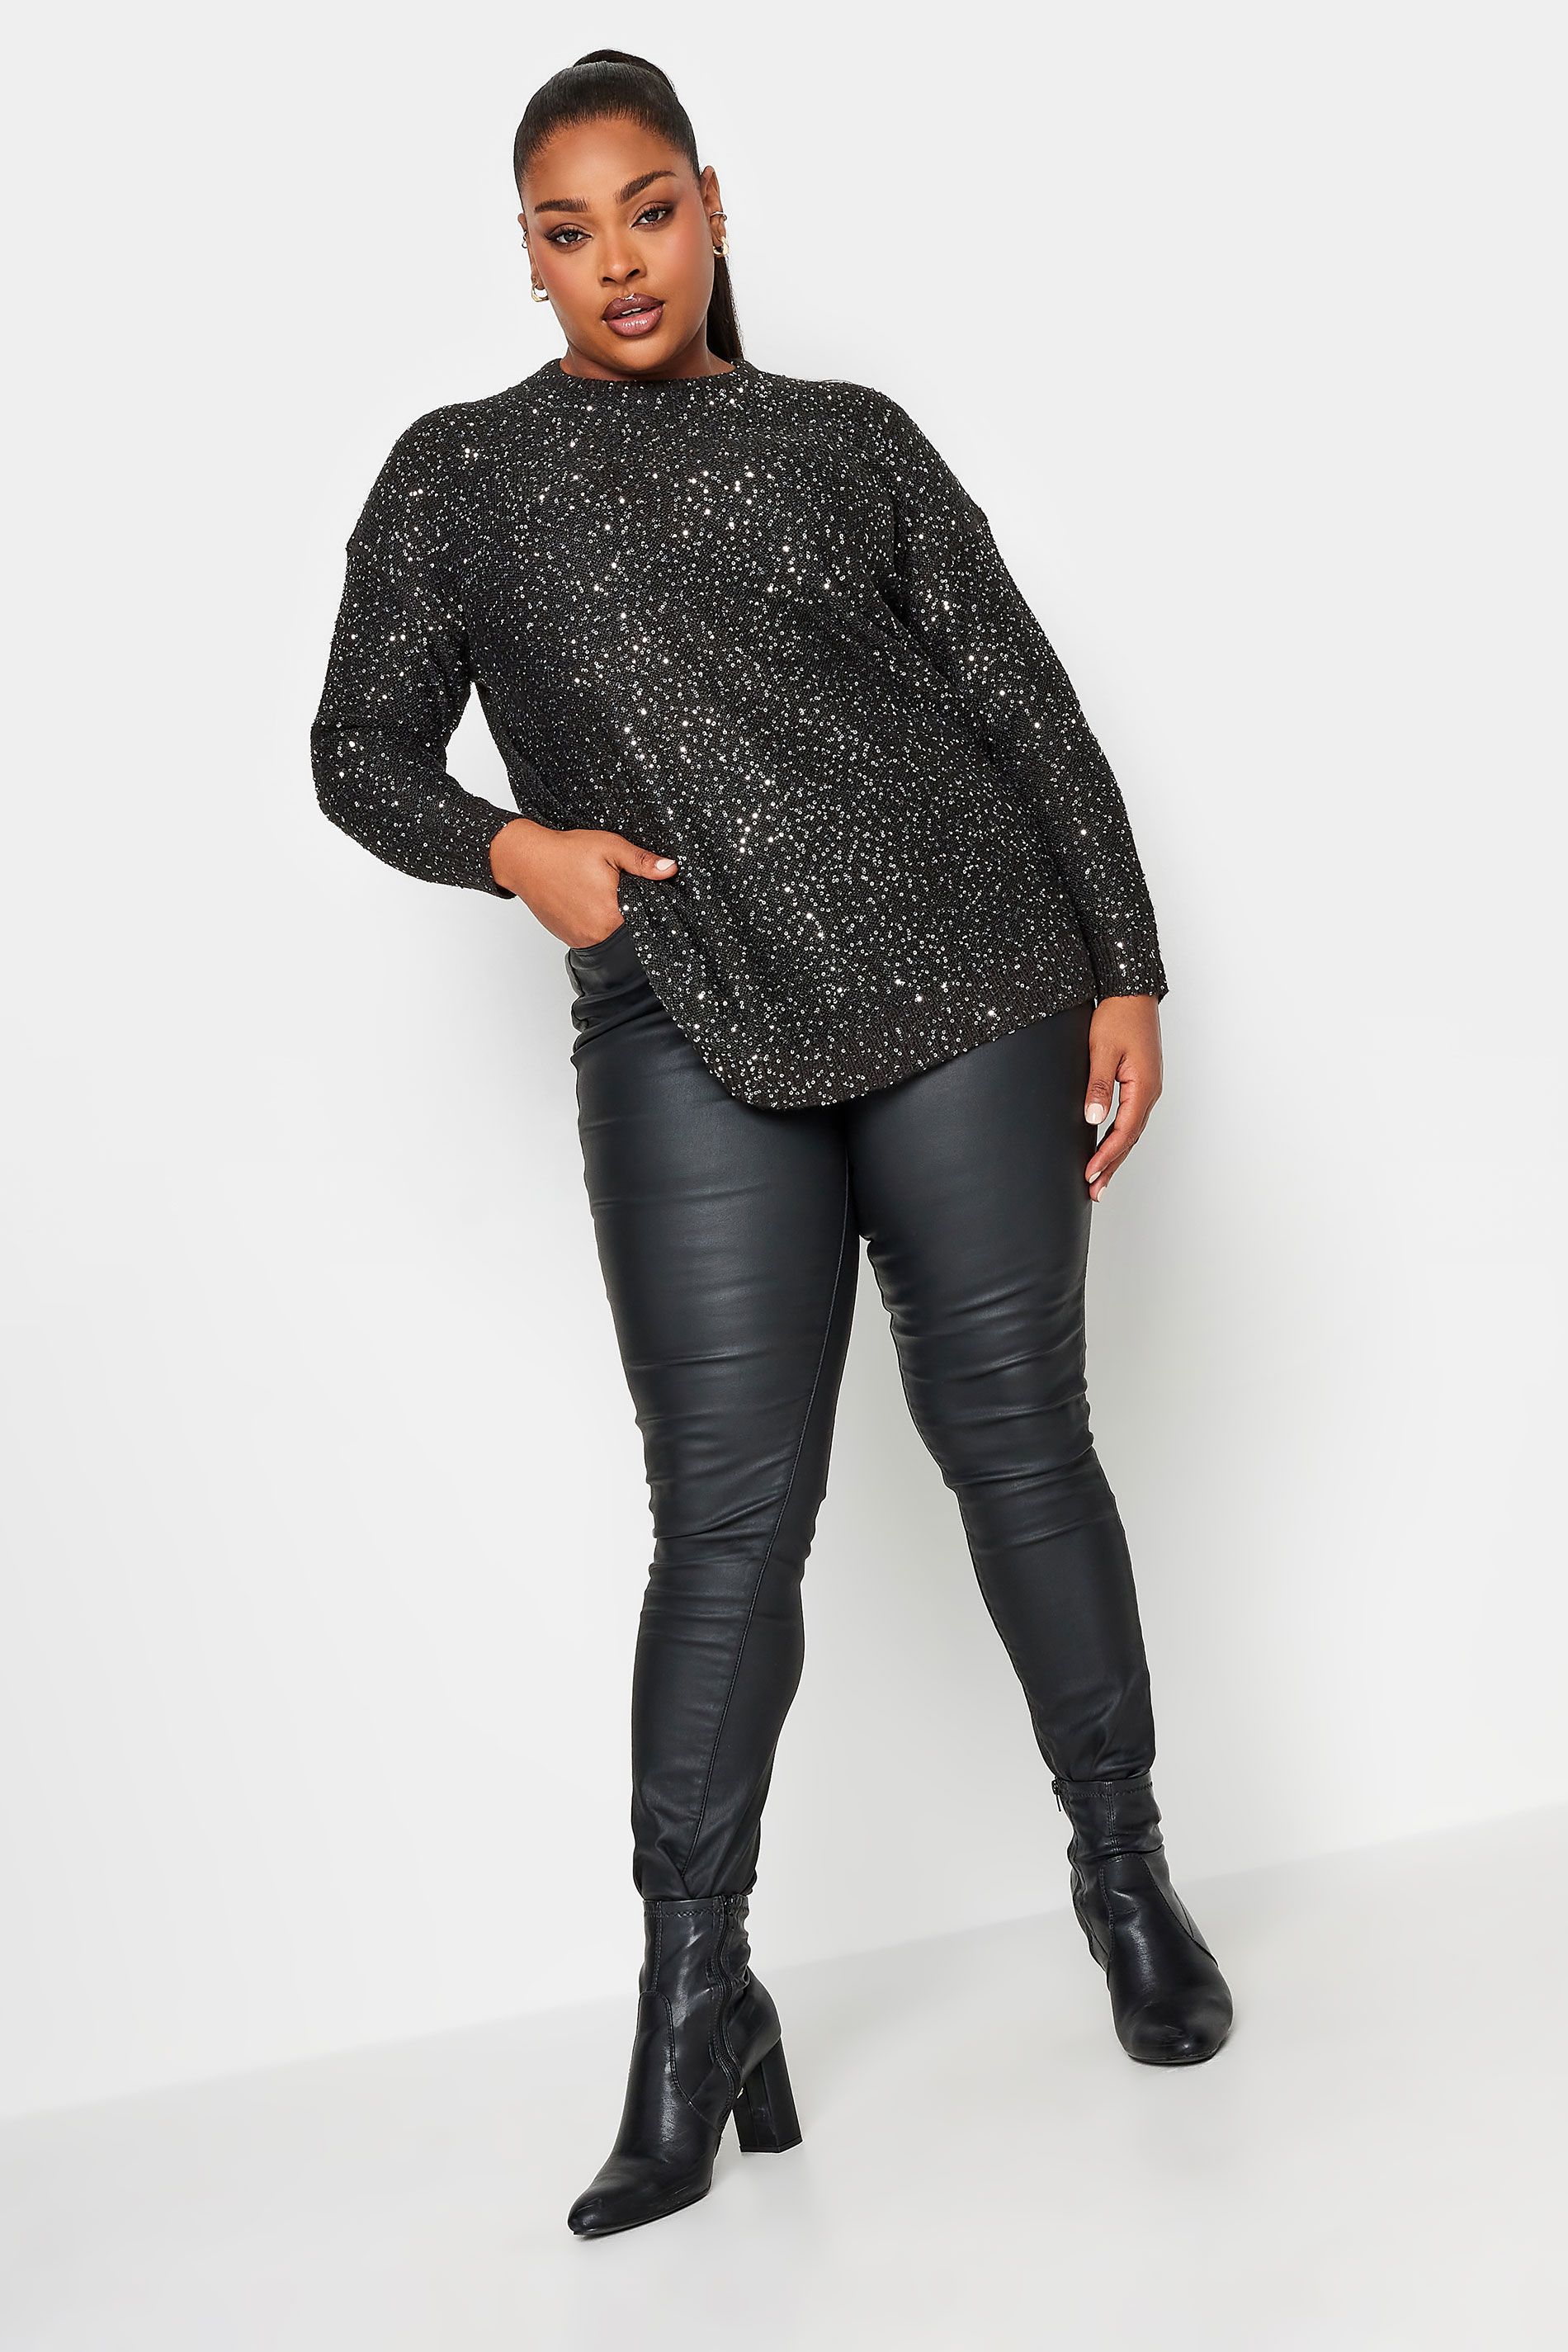 YOURS Plus Size Black Sequin Embellished Jumper | Yours Clothing 2